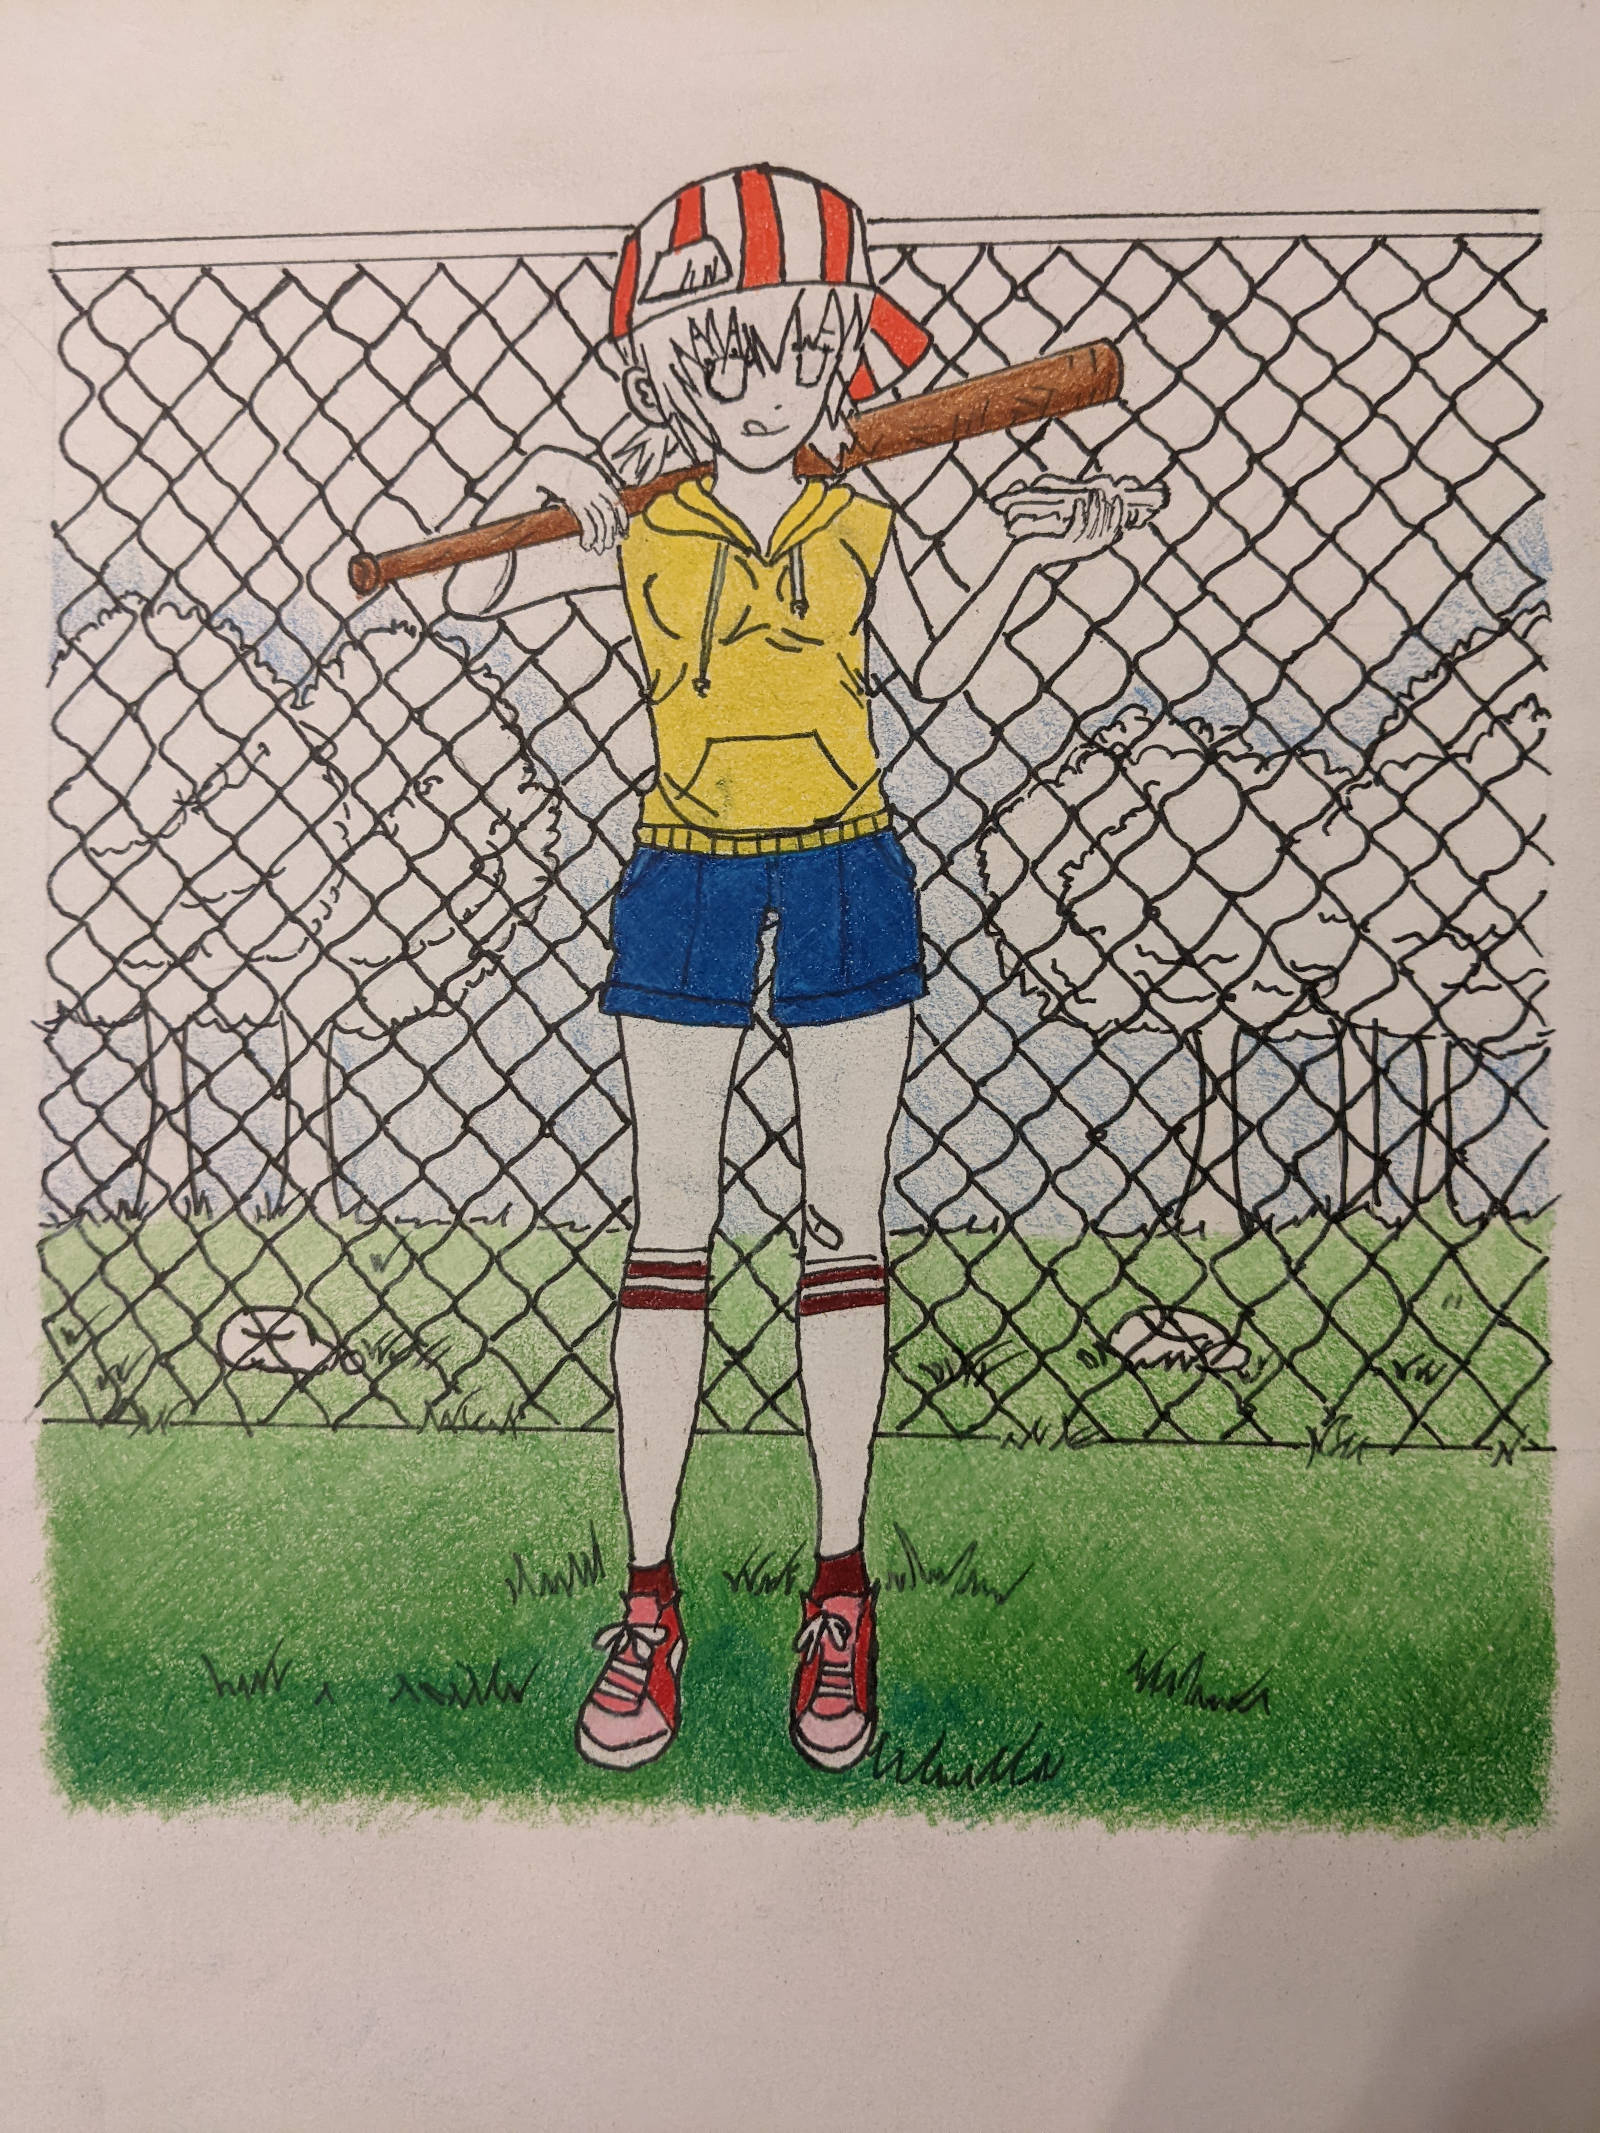 Girl holding a softball bat over her shoulder. In her left hand, holding a hotdog. She is standing in front of a chain-linked fence with trees in the background. Partially colored.